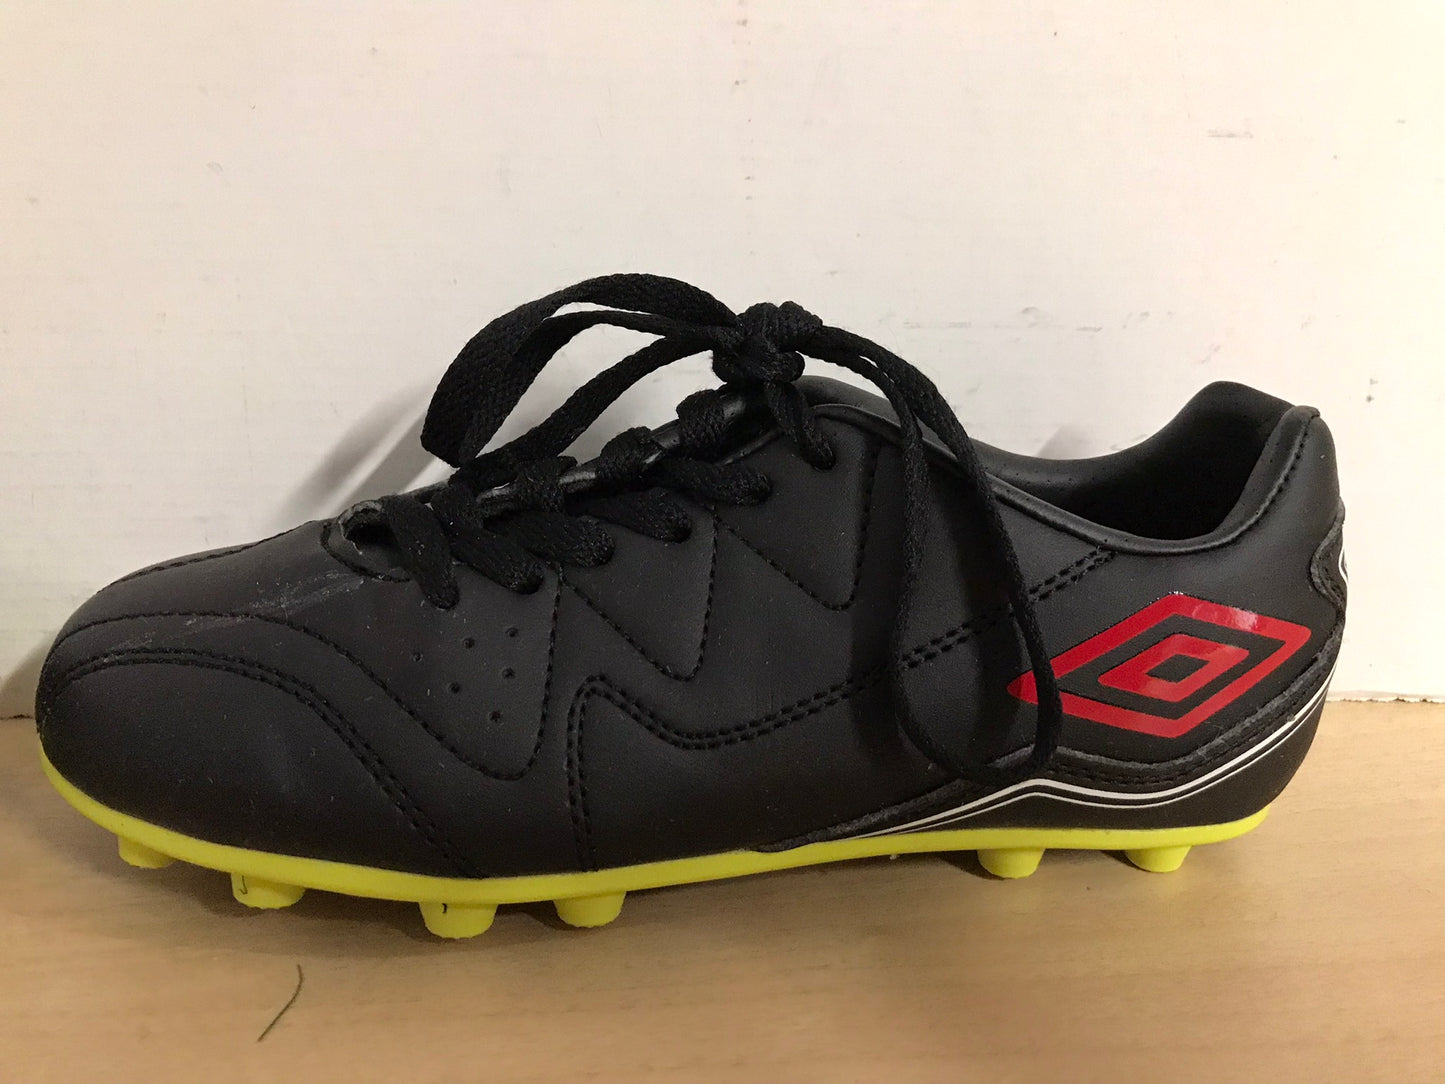 Soccer Shoes Cleats Child Size 2 Umbro Black Red Lime Excellent